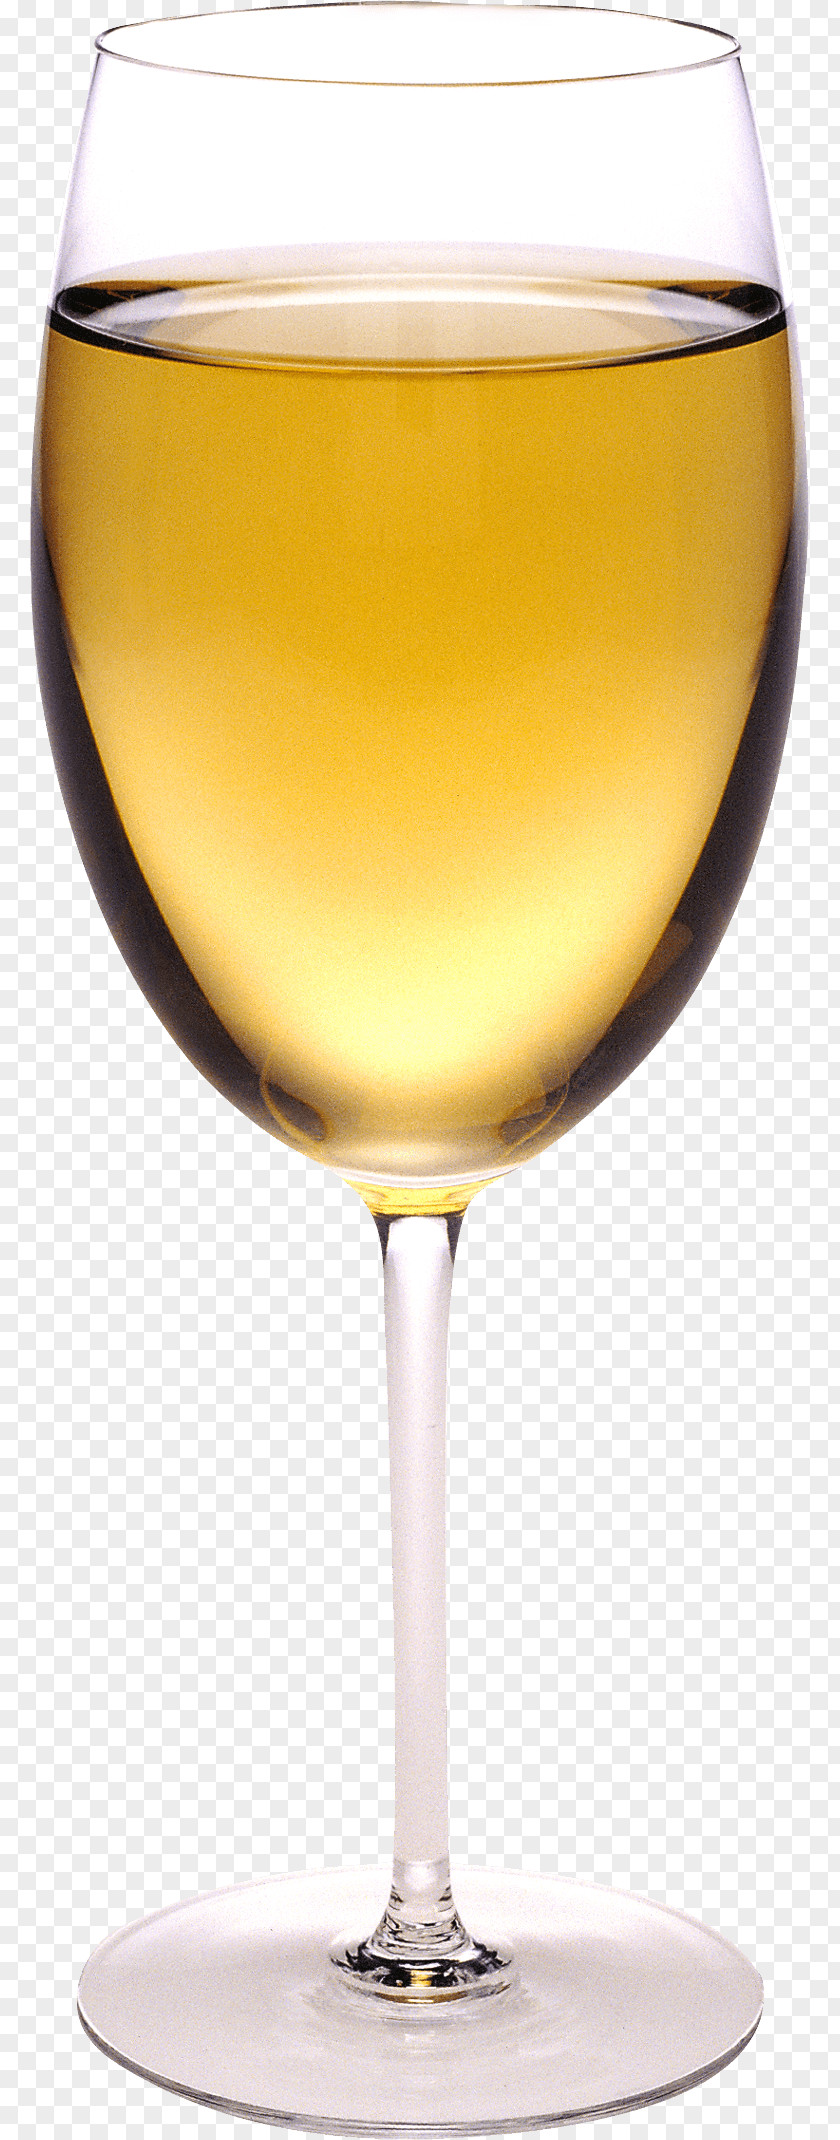 Glass Image White Wine Champagne Cocktail PNG